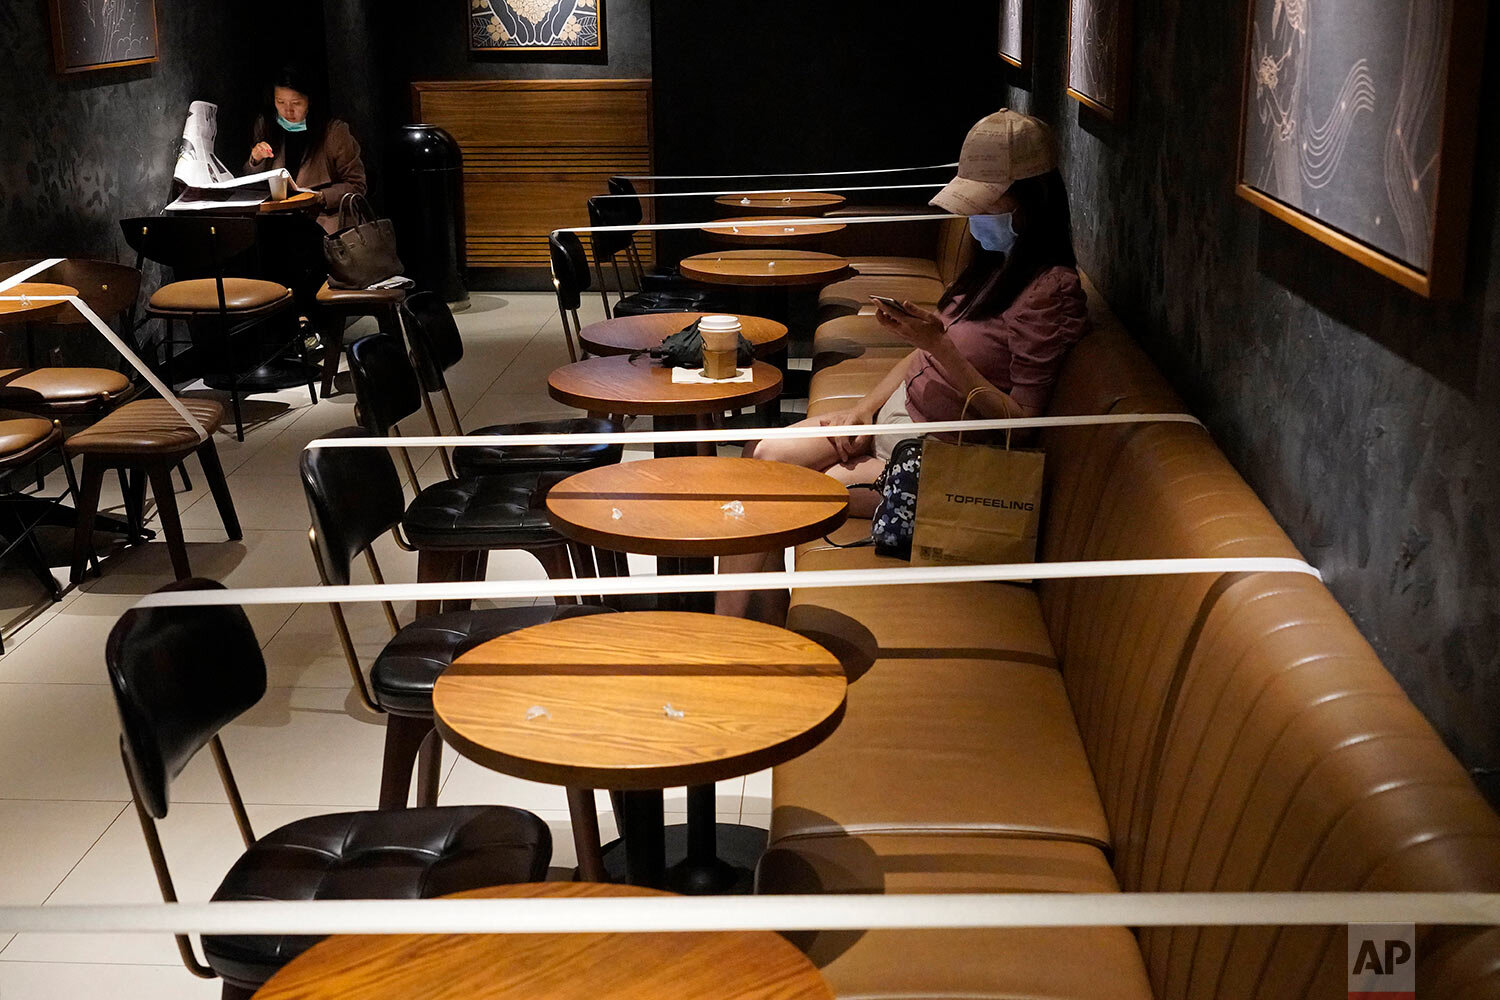  Tables and chairs are taped for the social distancing law enforcement to help curb the spread of the coronavirus at a Starbucks coffee shop in Hong Kong, Monday, March 30, 2020. (AP Photo/Vincent Yu) 